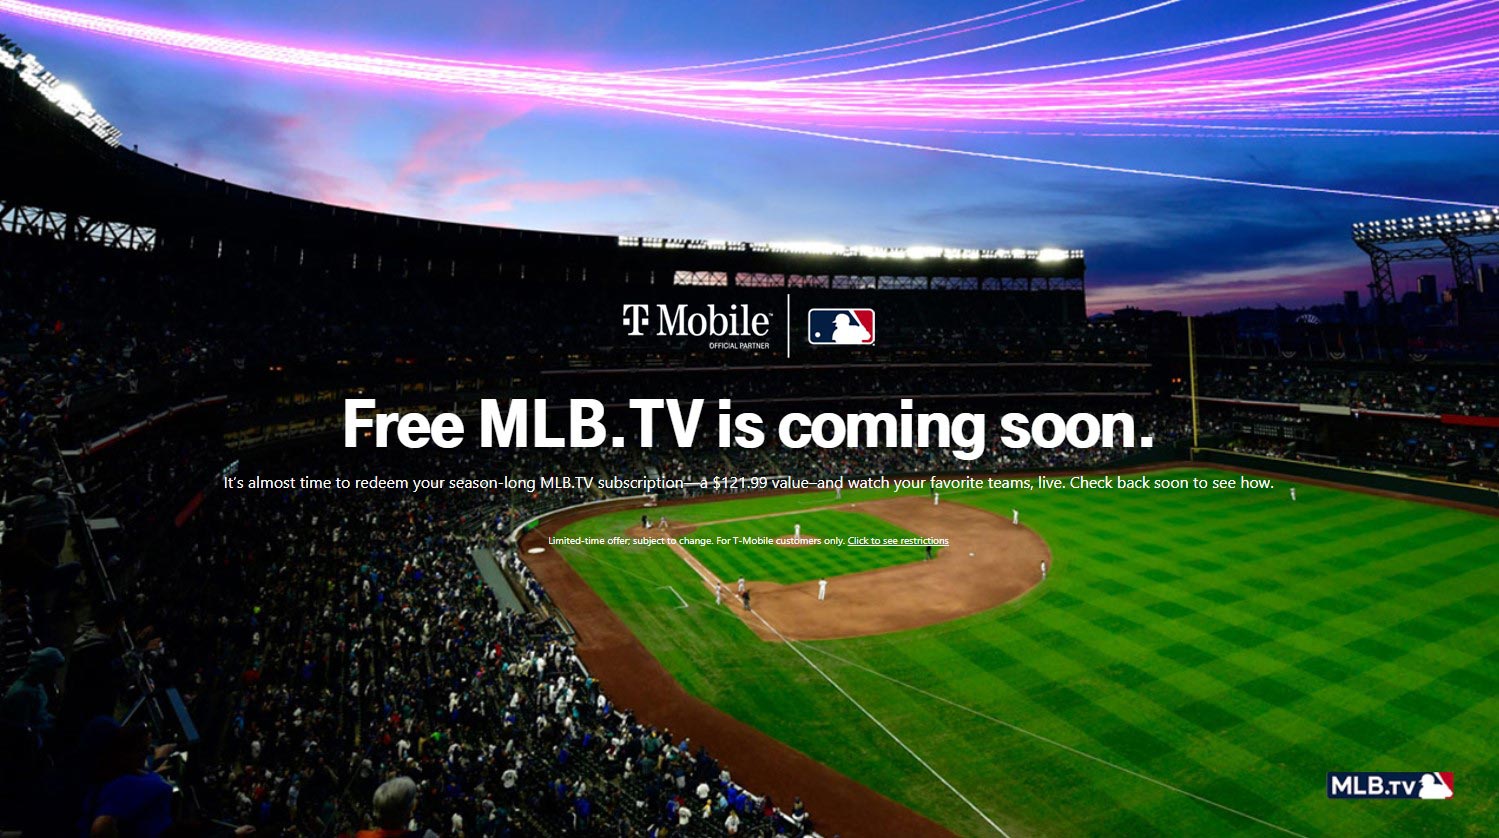 TMobile says free MLB.TV offer will be available 'as soon as baseball